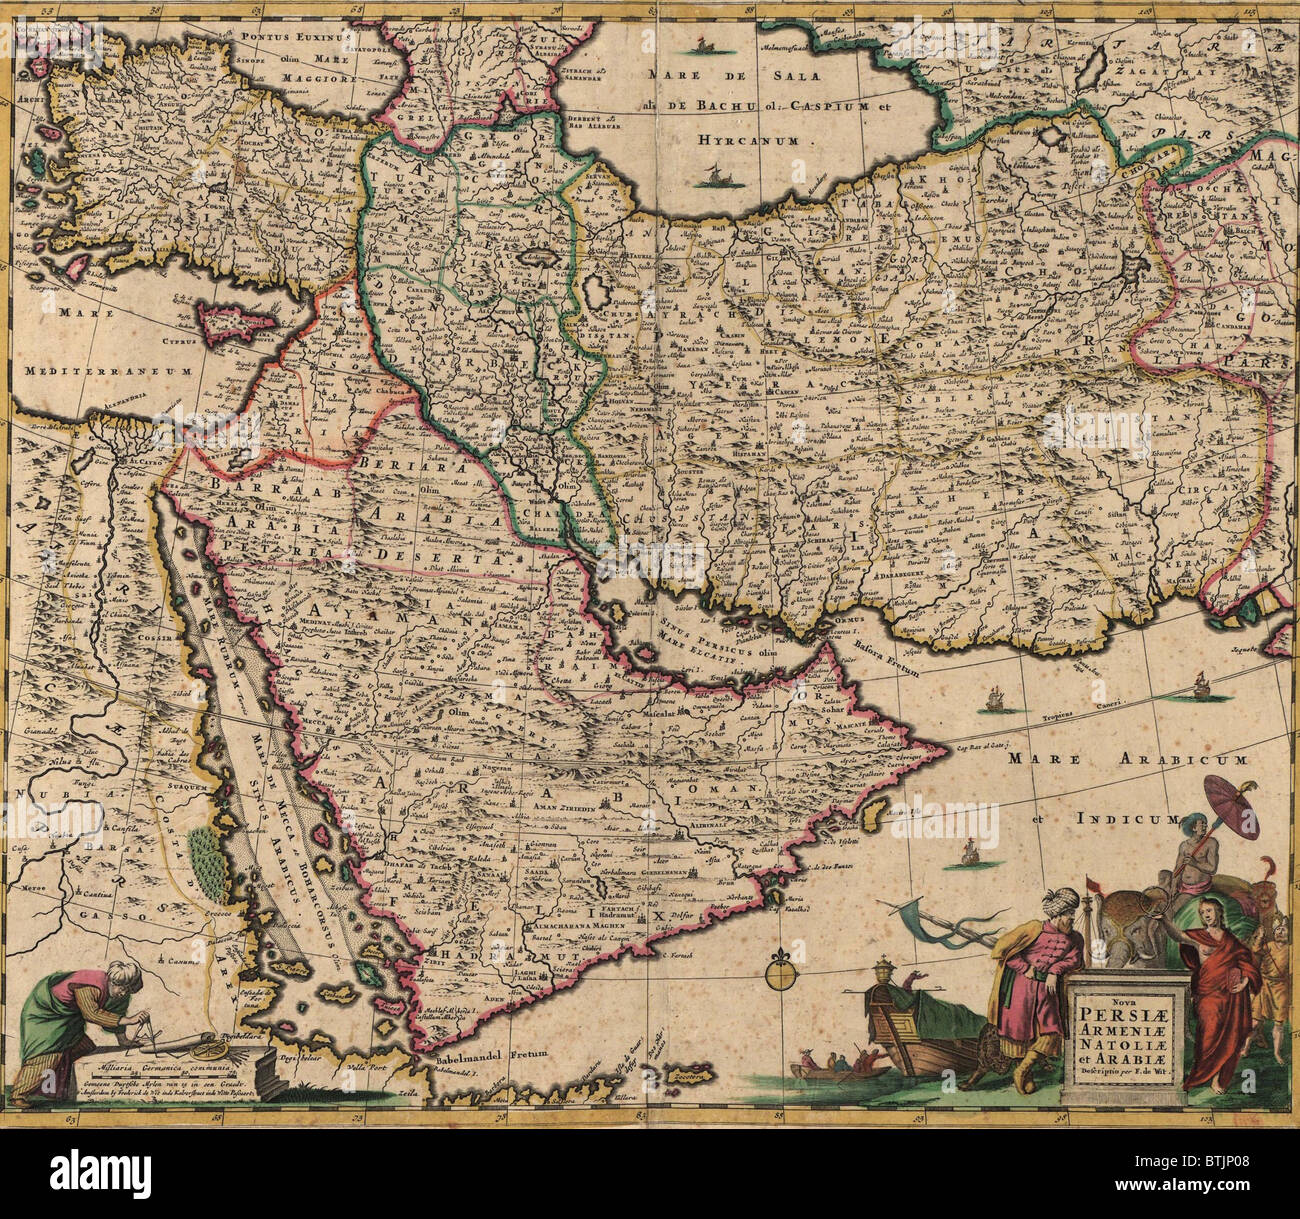 1666 map of Southwest Asia, showing Arabia, Persia, and Ottoman Empire. Stock Photo